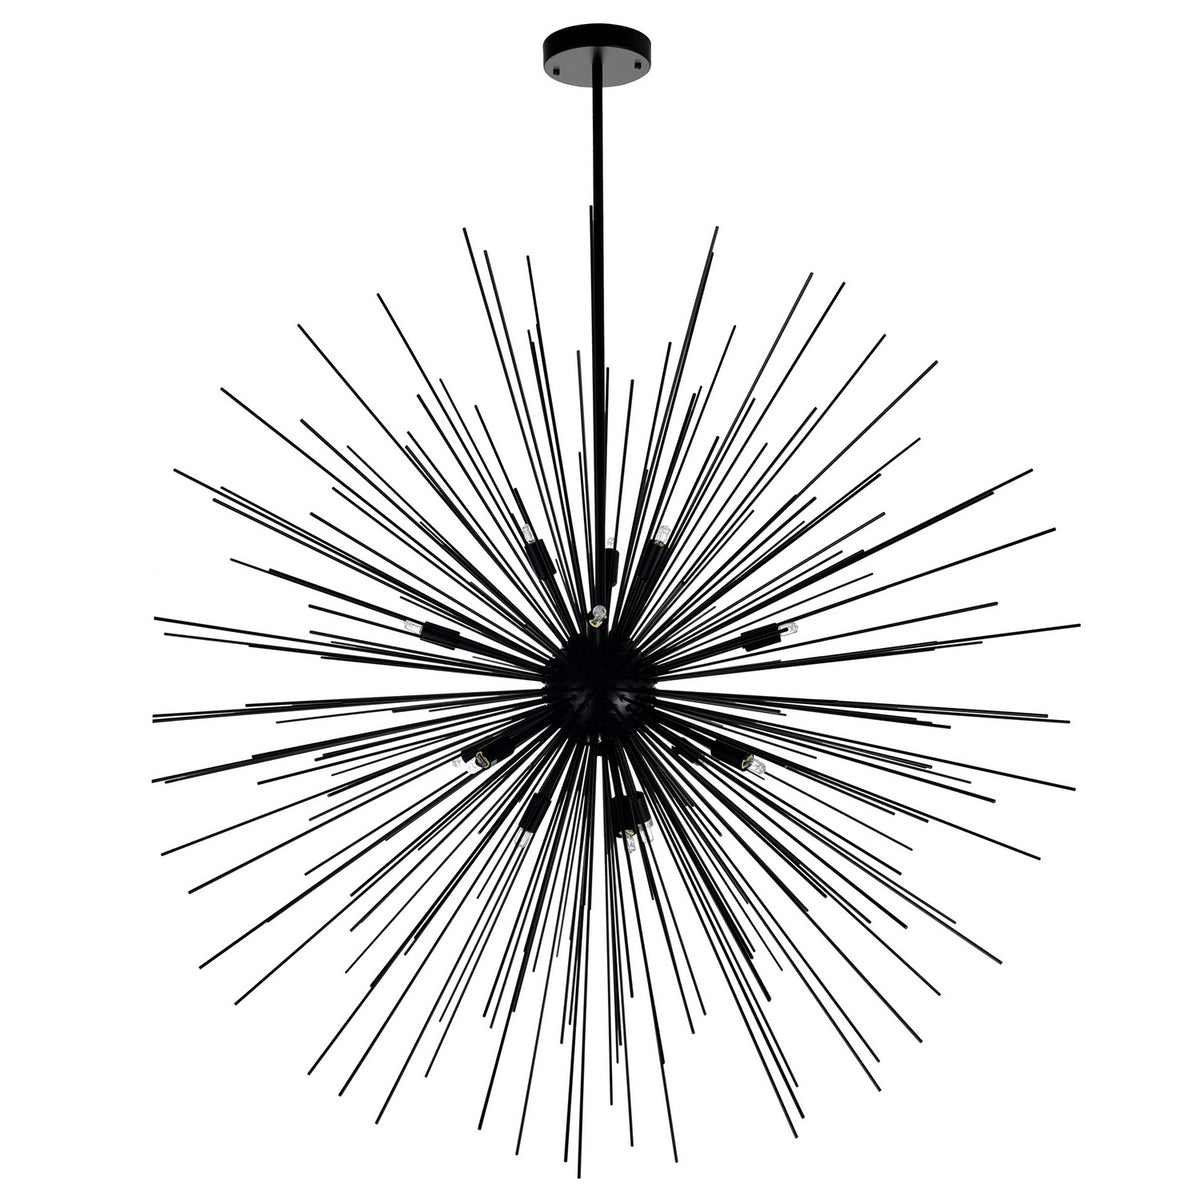 CWI Lighting 14 Light Chandelier from the Savannah collection in Black finish